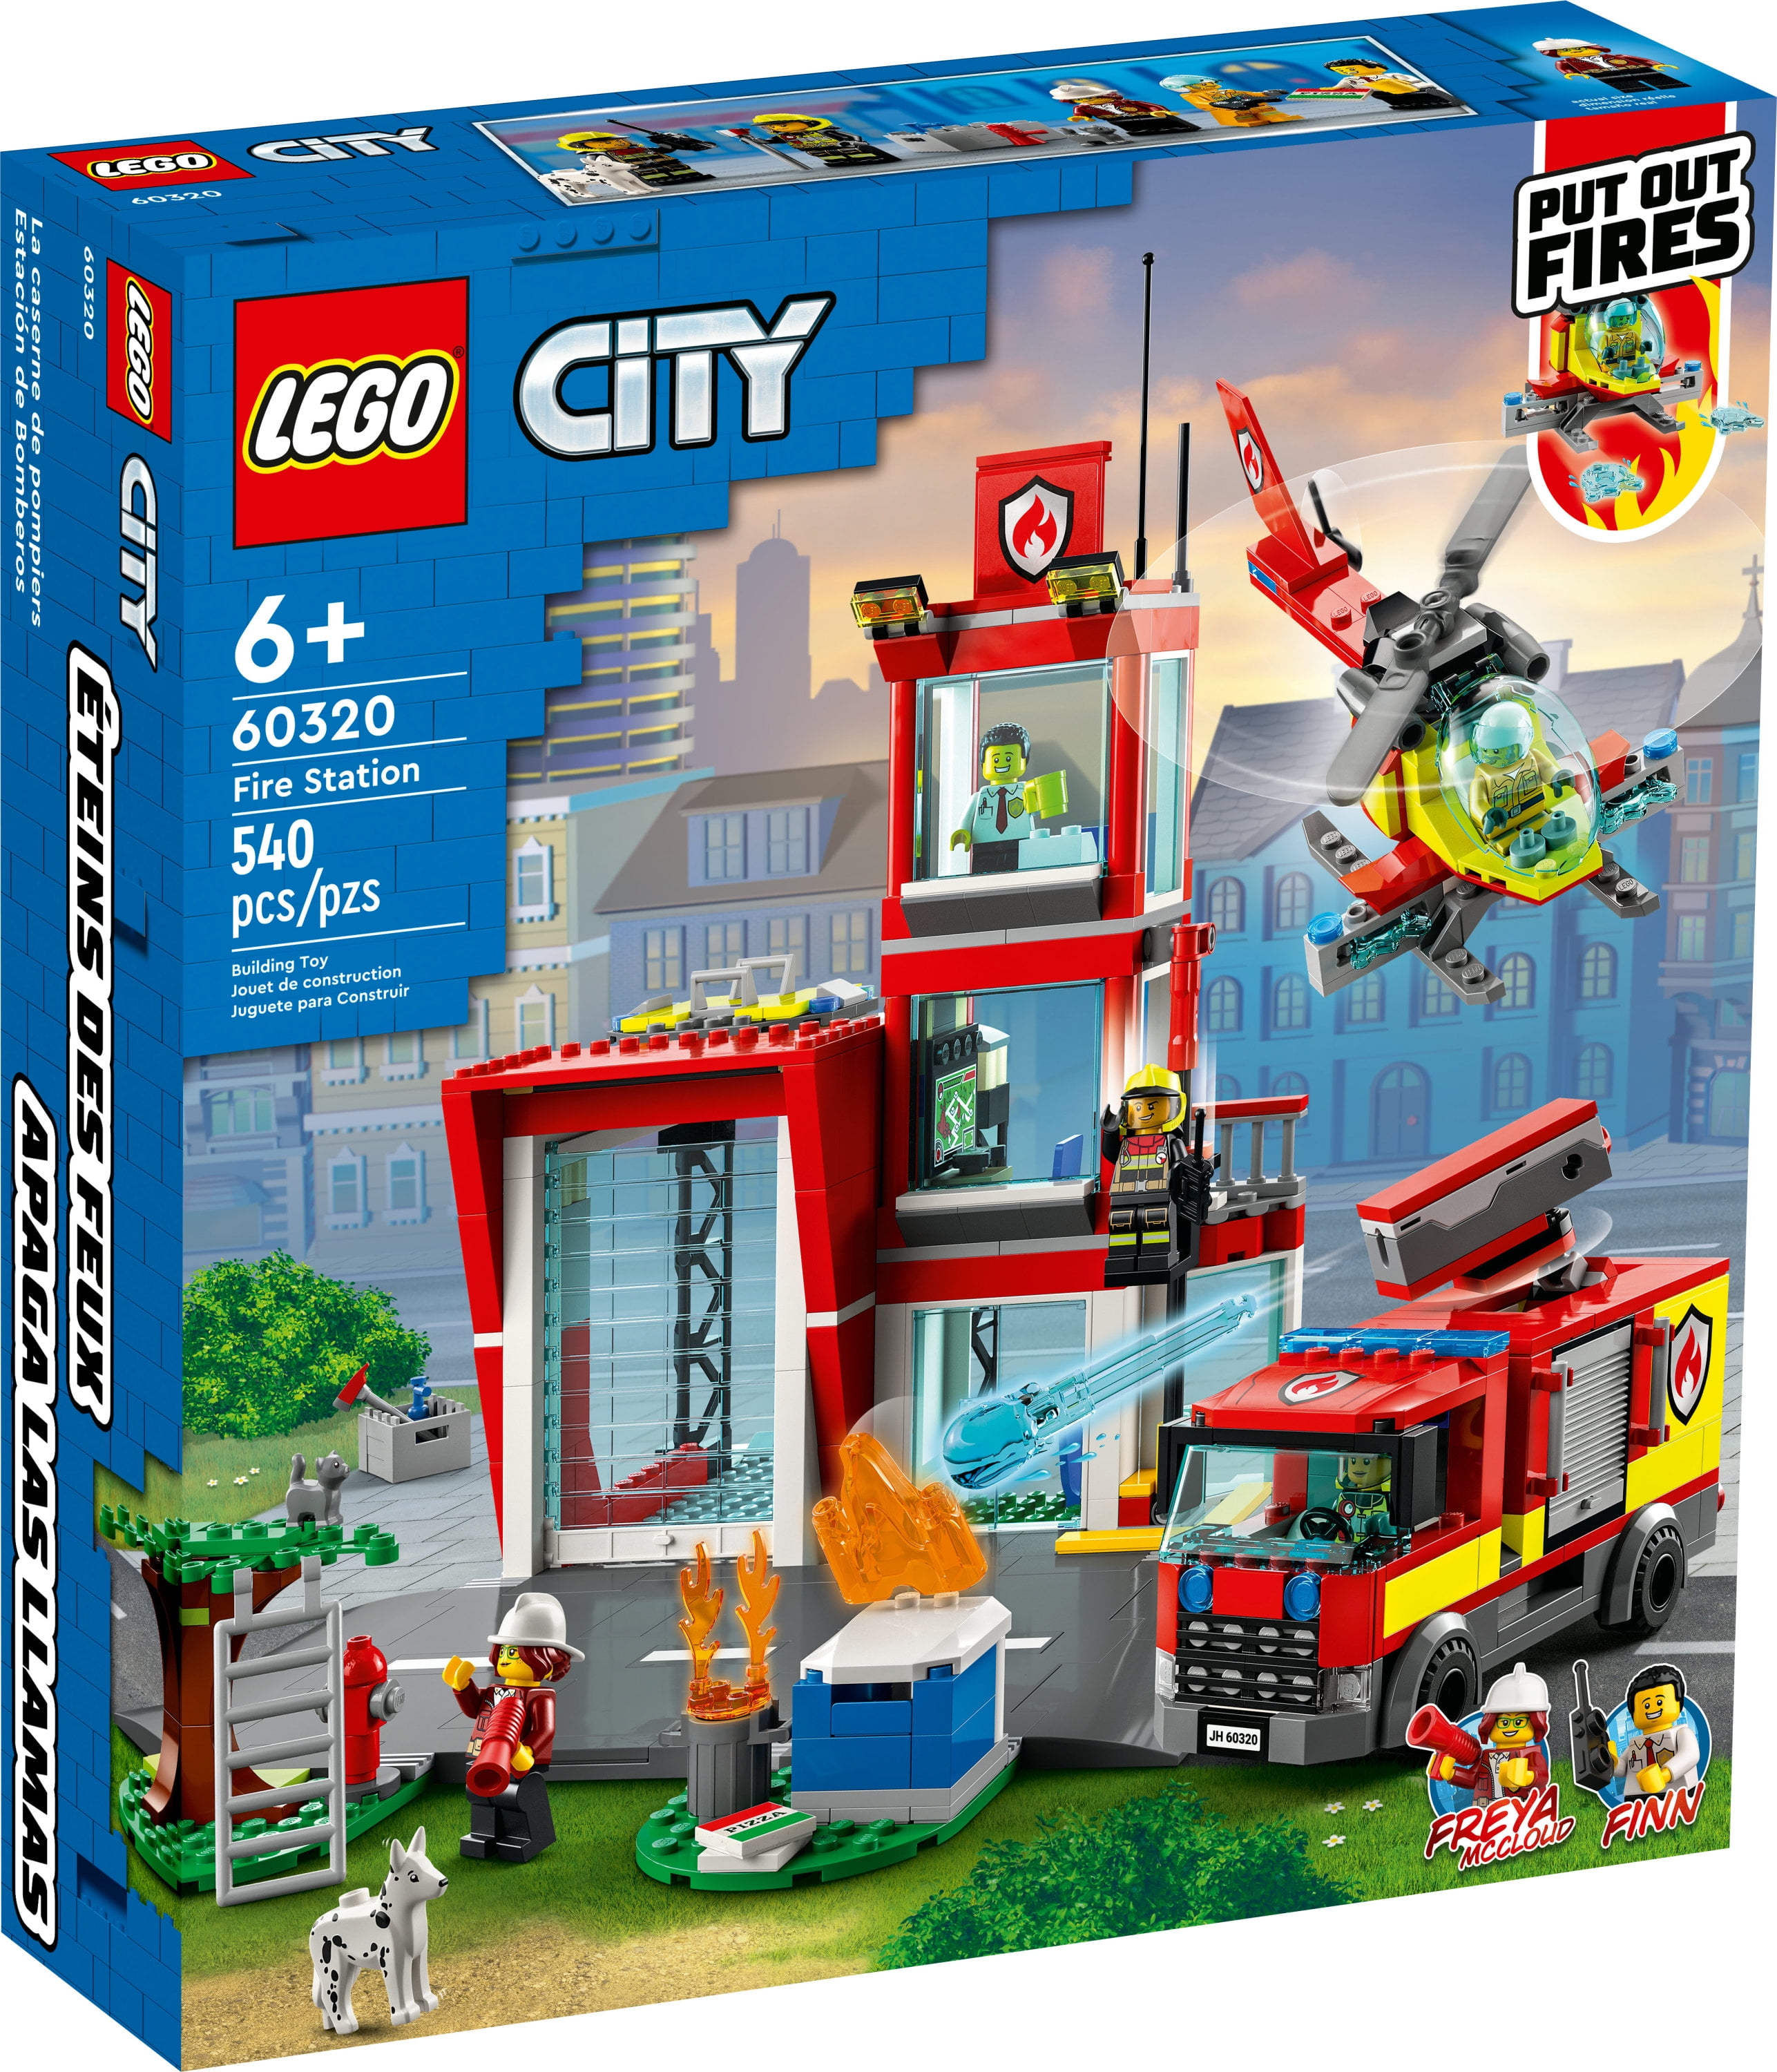 LEGO City Fire Station Set 60320 with Garage, Helicopter & Fire